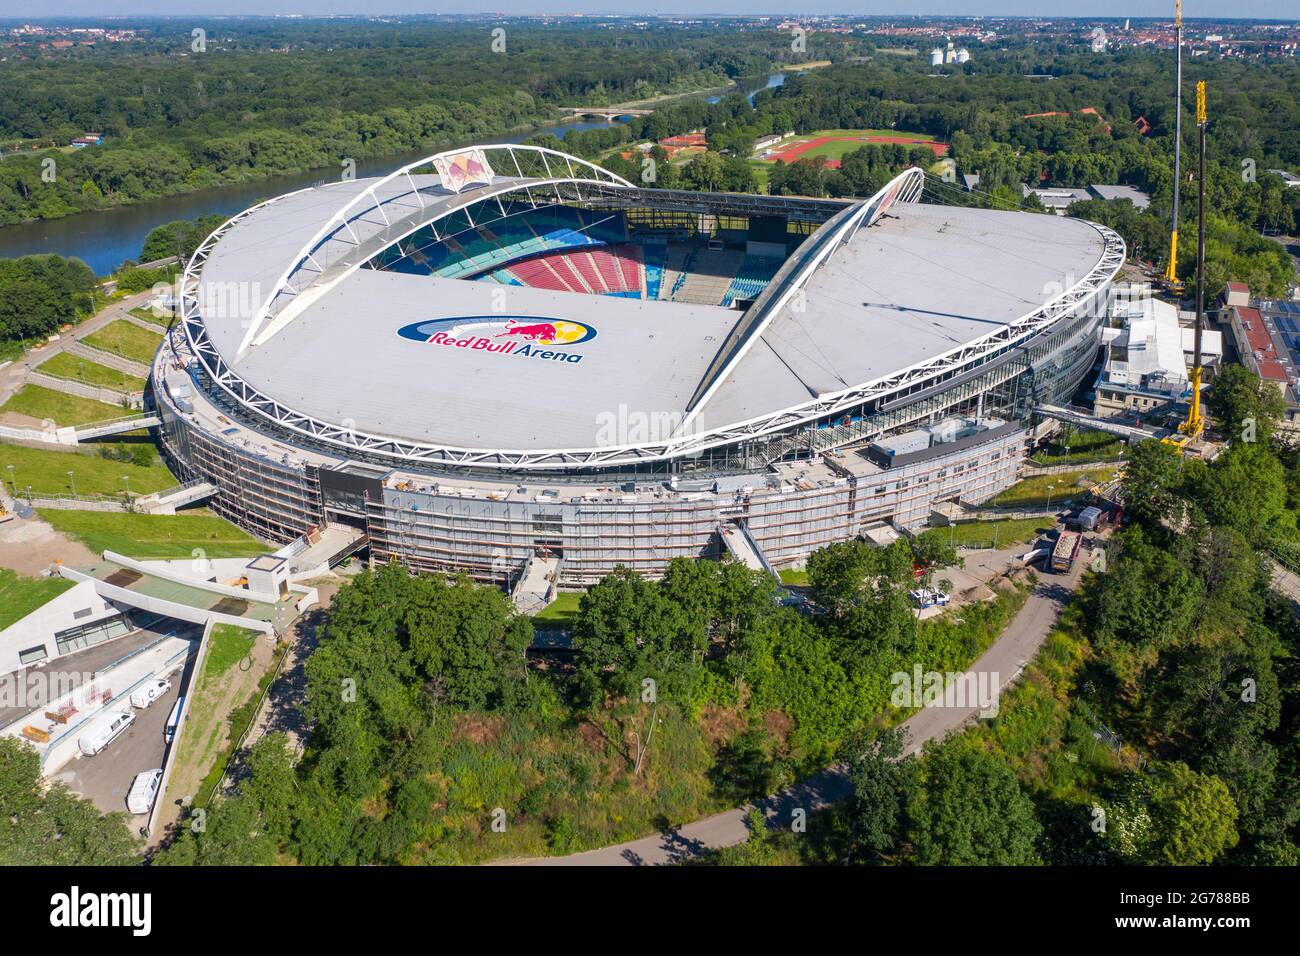 14 June 2021, Saxony, Leipzig: Two cranes stand at the Red Bull Arena. RB  Leipzig's home ground is being rebuilt. The spectator capacity increases  from 42,558 to 47,069 standing and seated. The